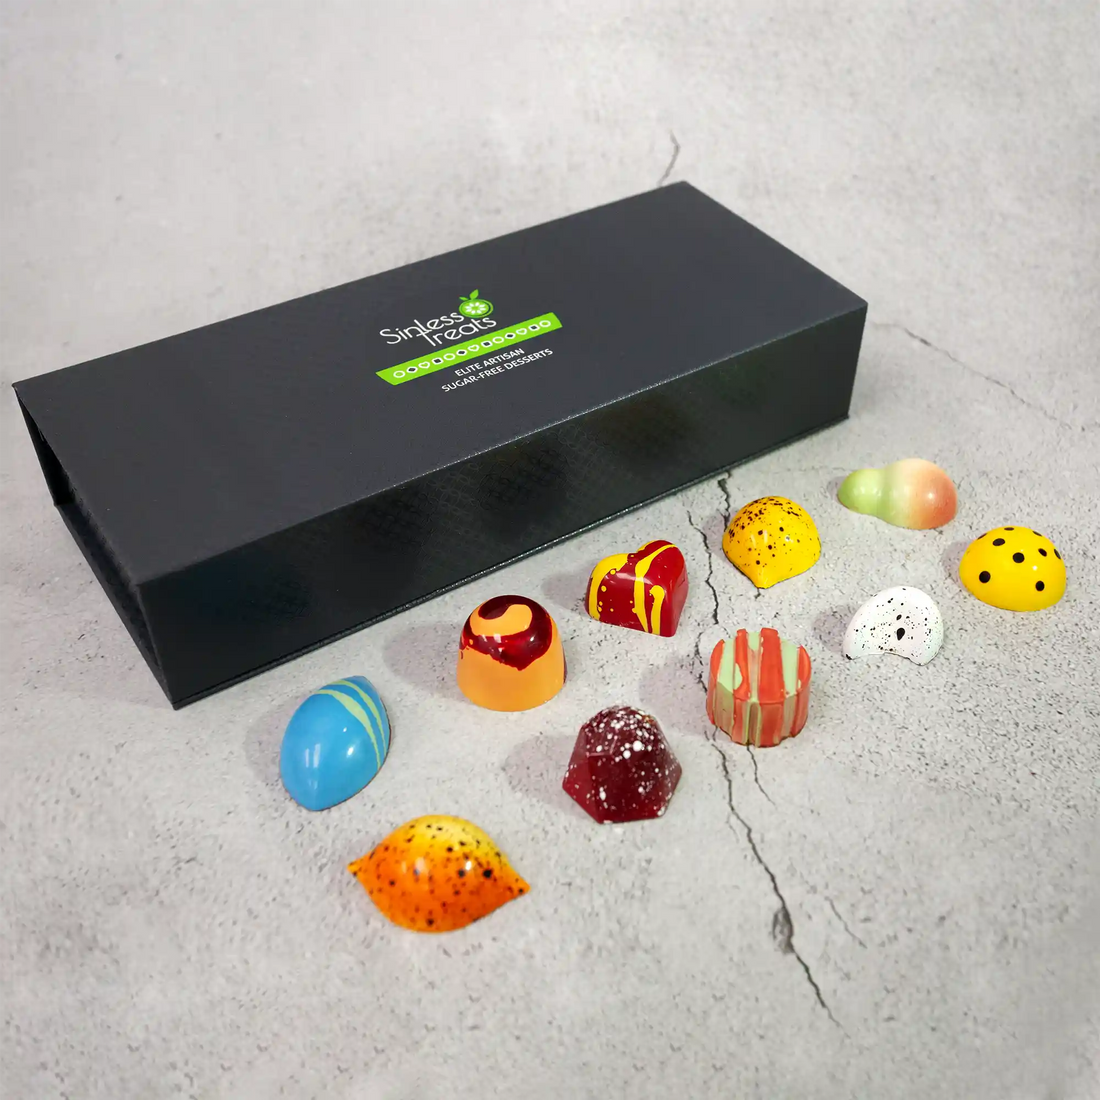 Sunshine Luxury Gift Box with 10 pieces of brightly hand painted bonbons with berry and fruity flavors